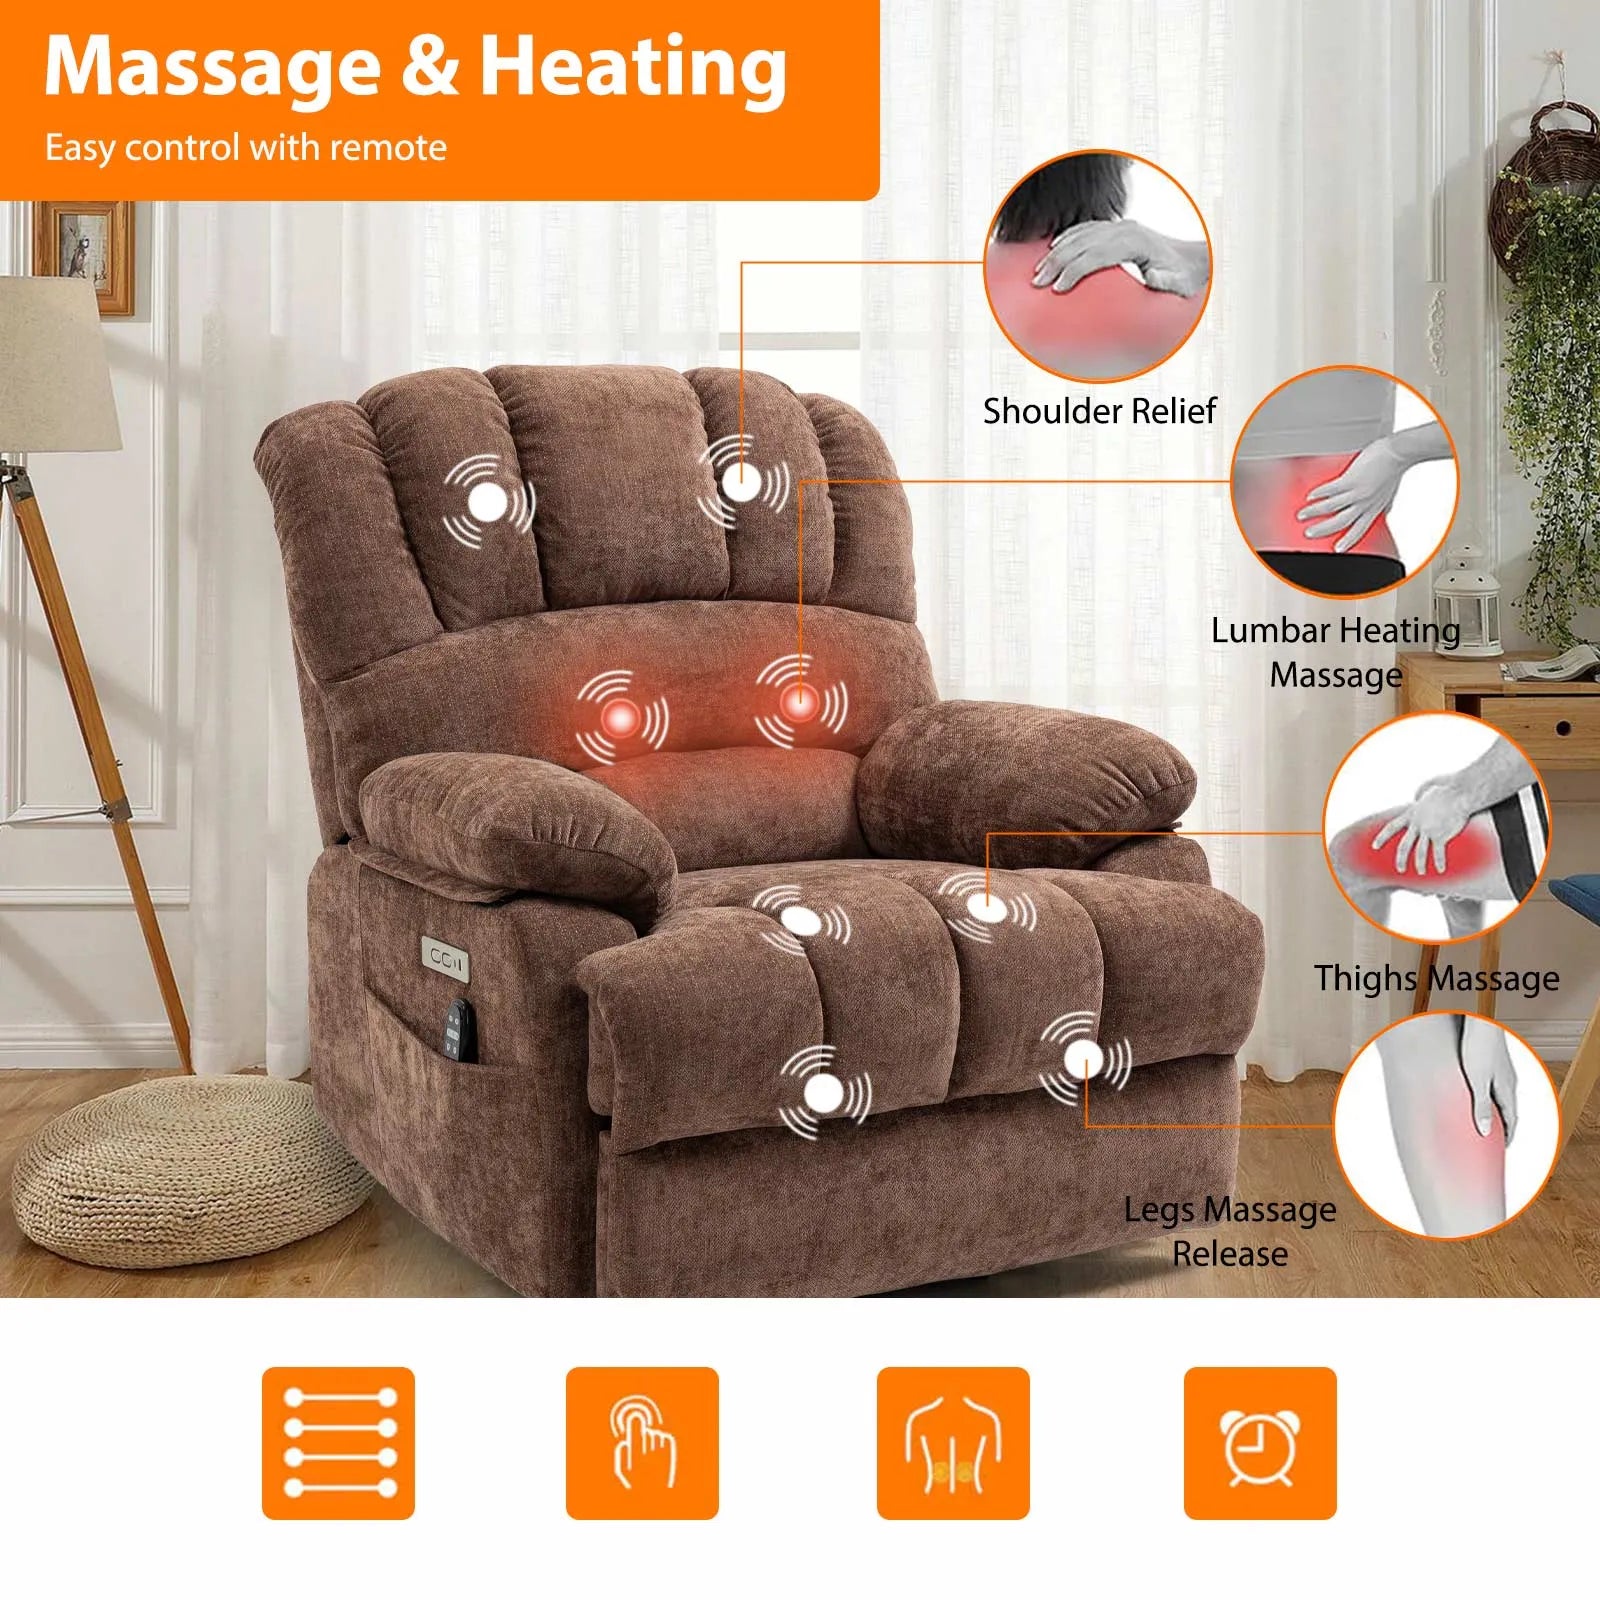 Wide Faux Leather Power Lift Recliner Chair - Heated Massage